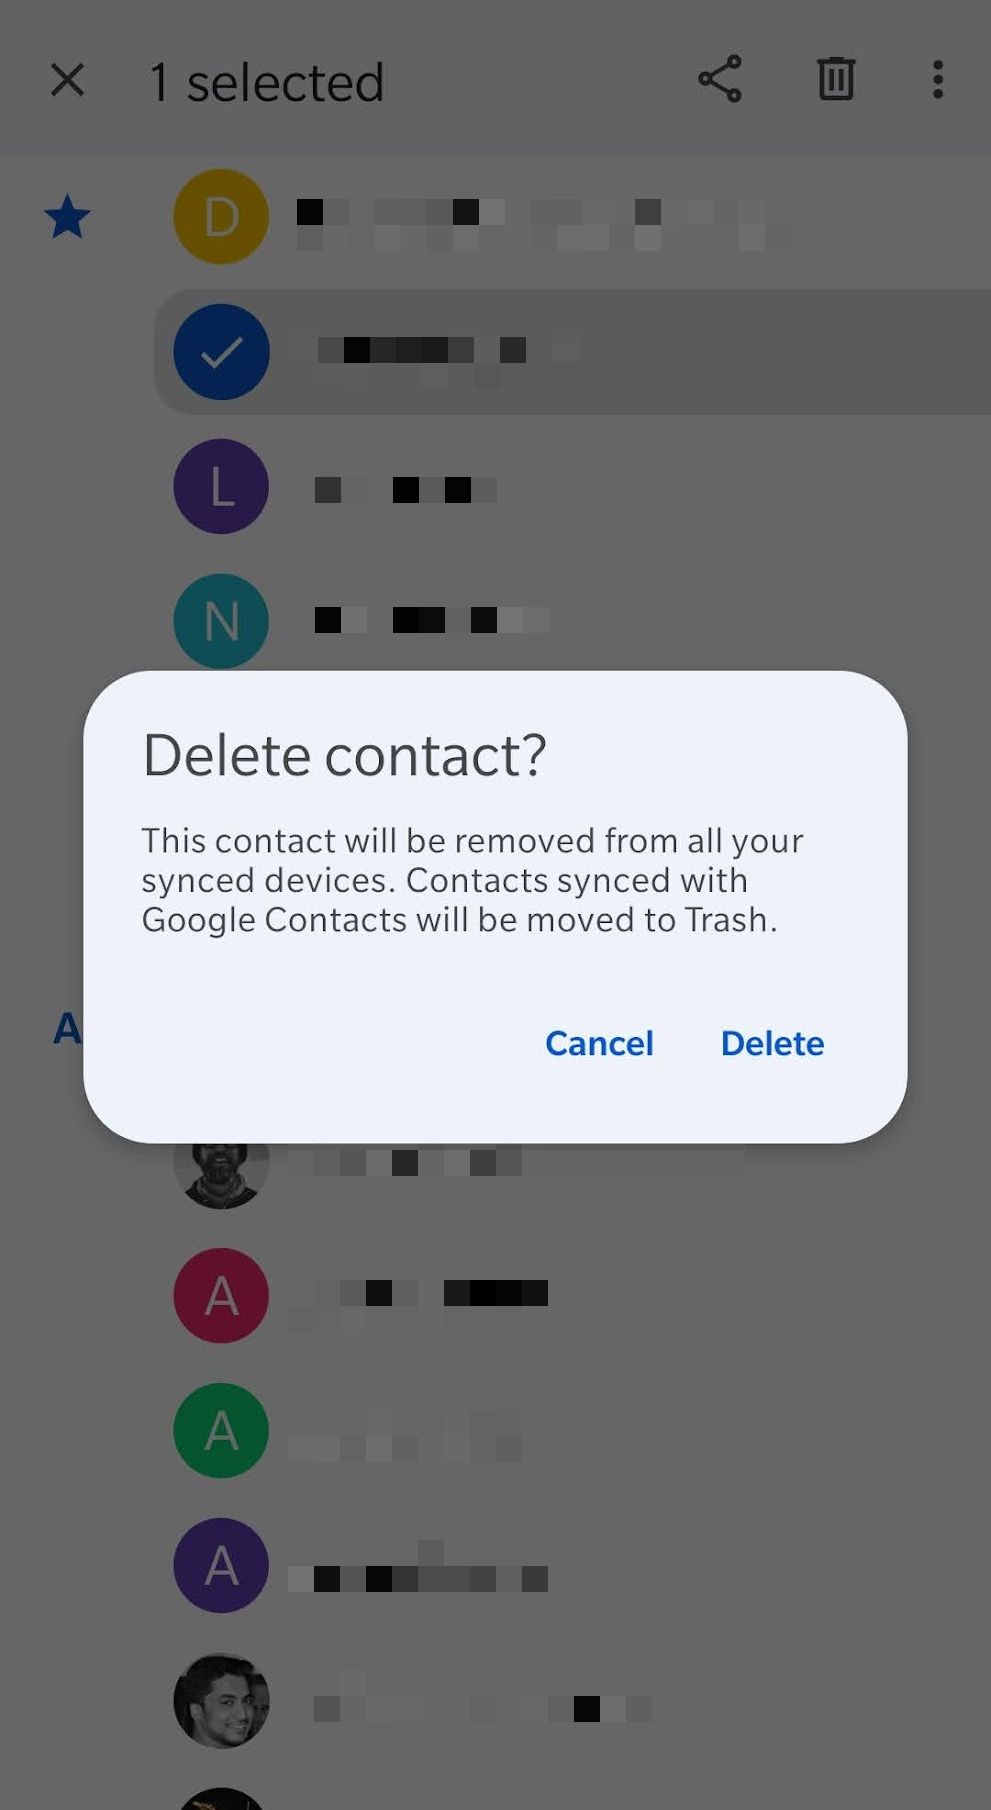 Confirm deleting a Google contact in the Android Contacts app.